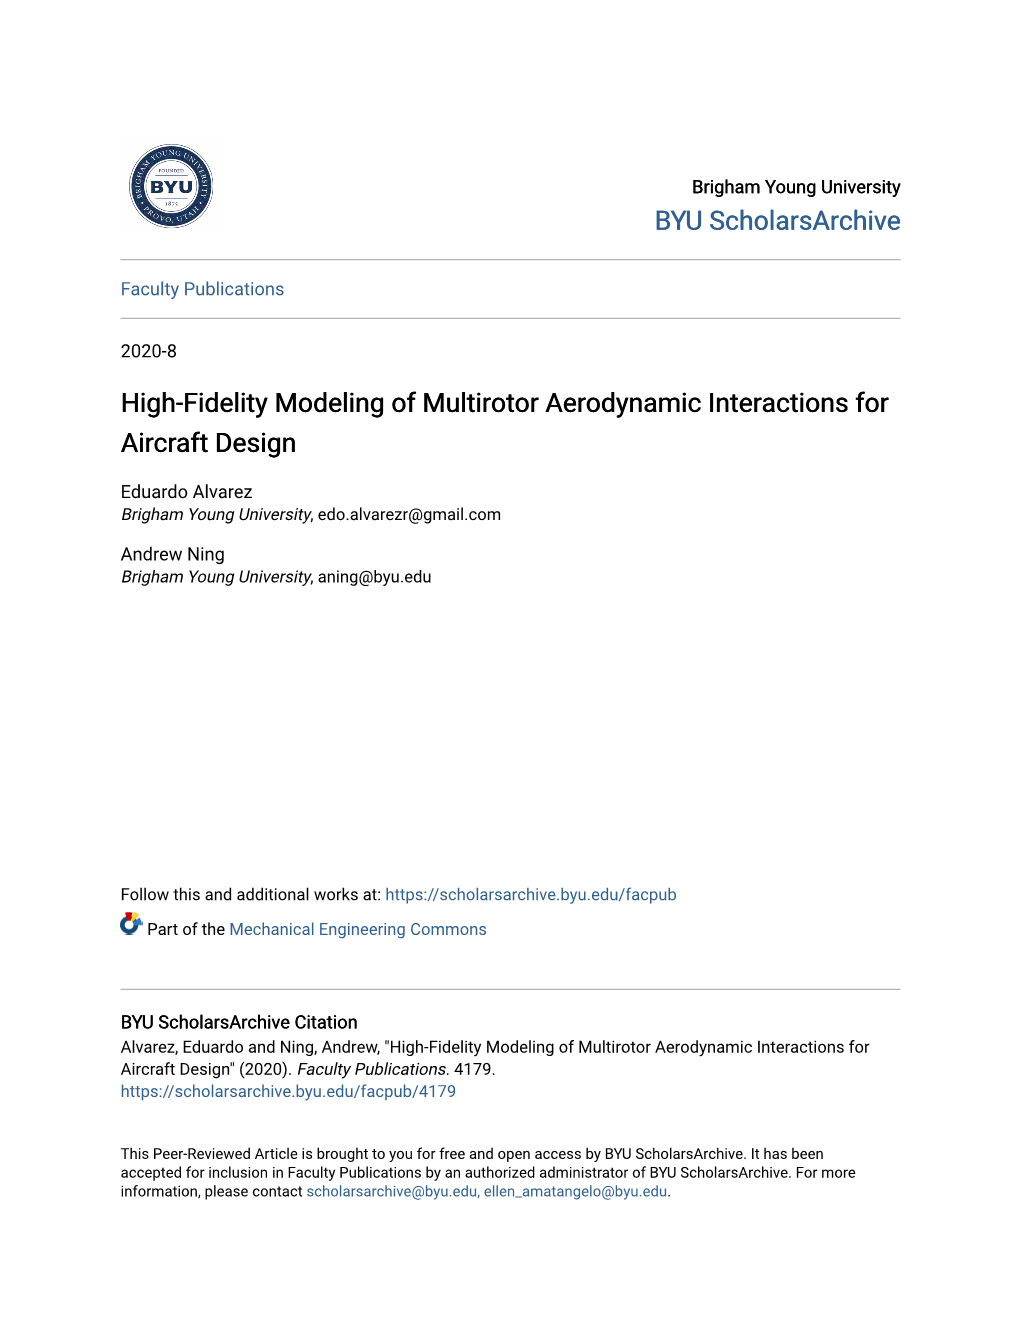 High-Fidelity Modeling of Multirotor Aerodynamic Interactions for Aircraft Design